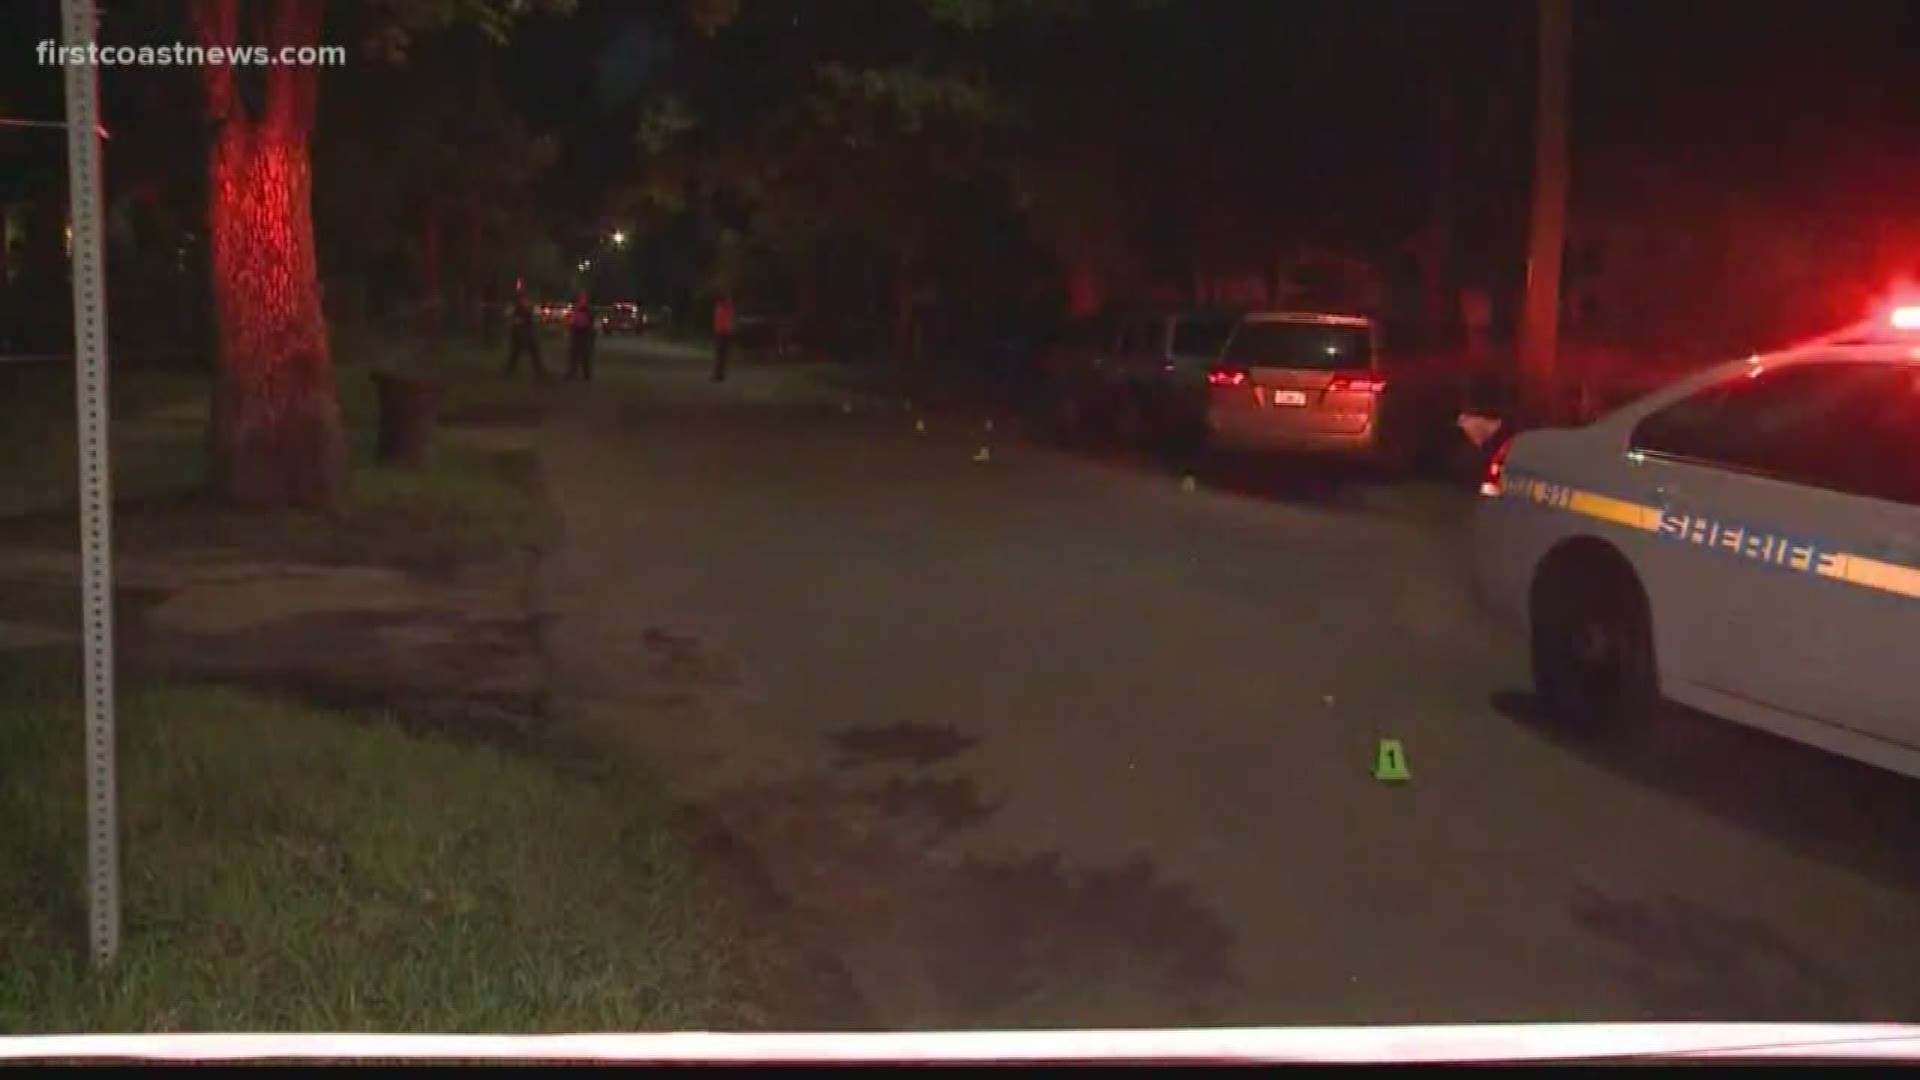 One adult and one teenager were injured Monday evening during a drive-by shooting in Moncrief, according to the Jacksonville Sheriff's Office.